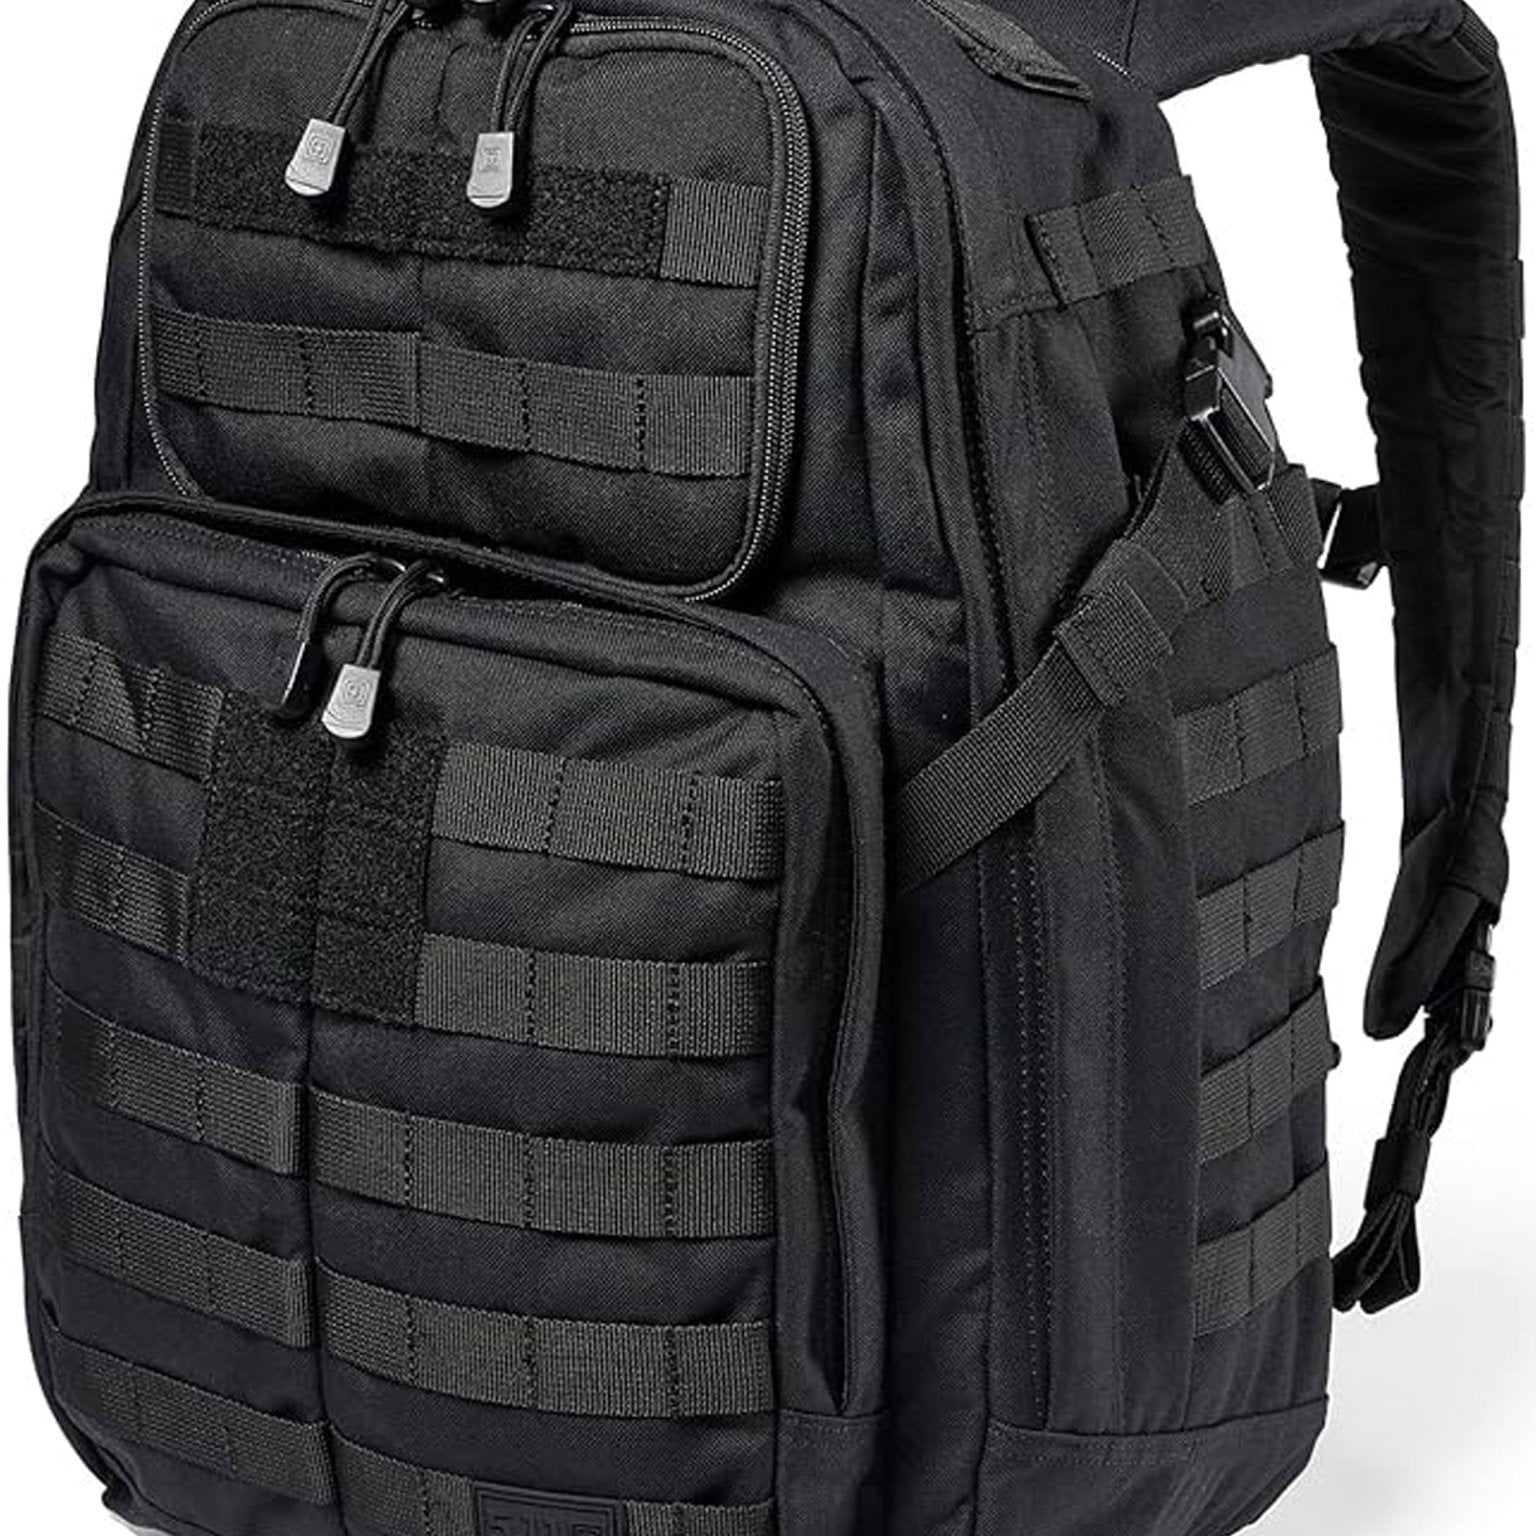 4elementsclothing5.11 Tactical5.11 Tactical - 5.11 Tactical Rush 24 2.0 Backpack - Style 56563Bag56563-019